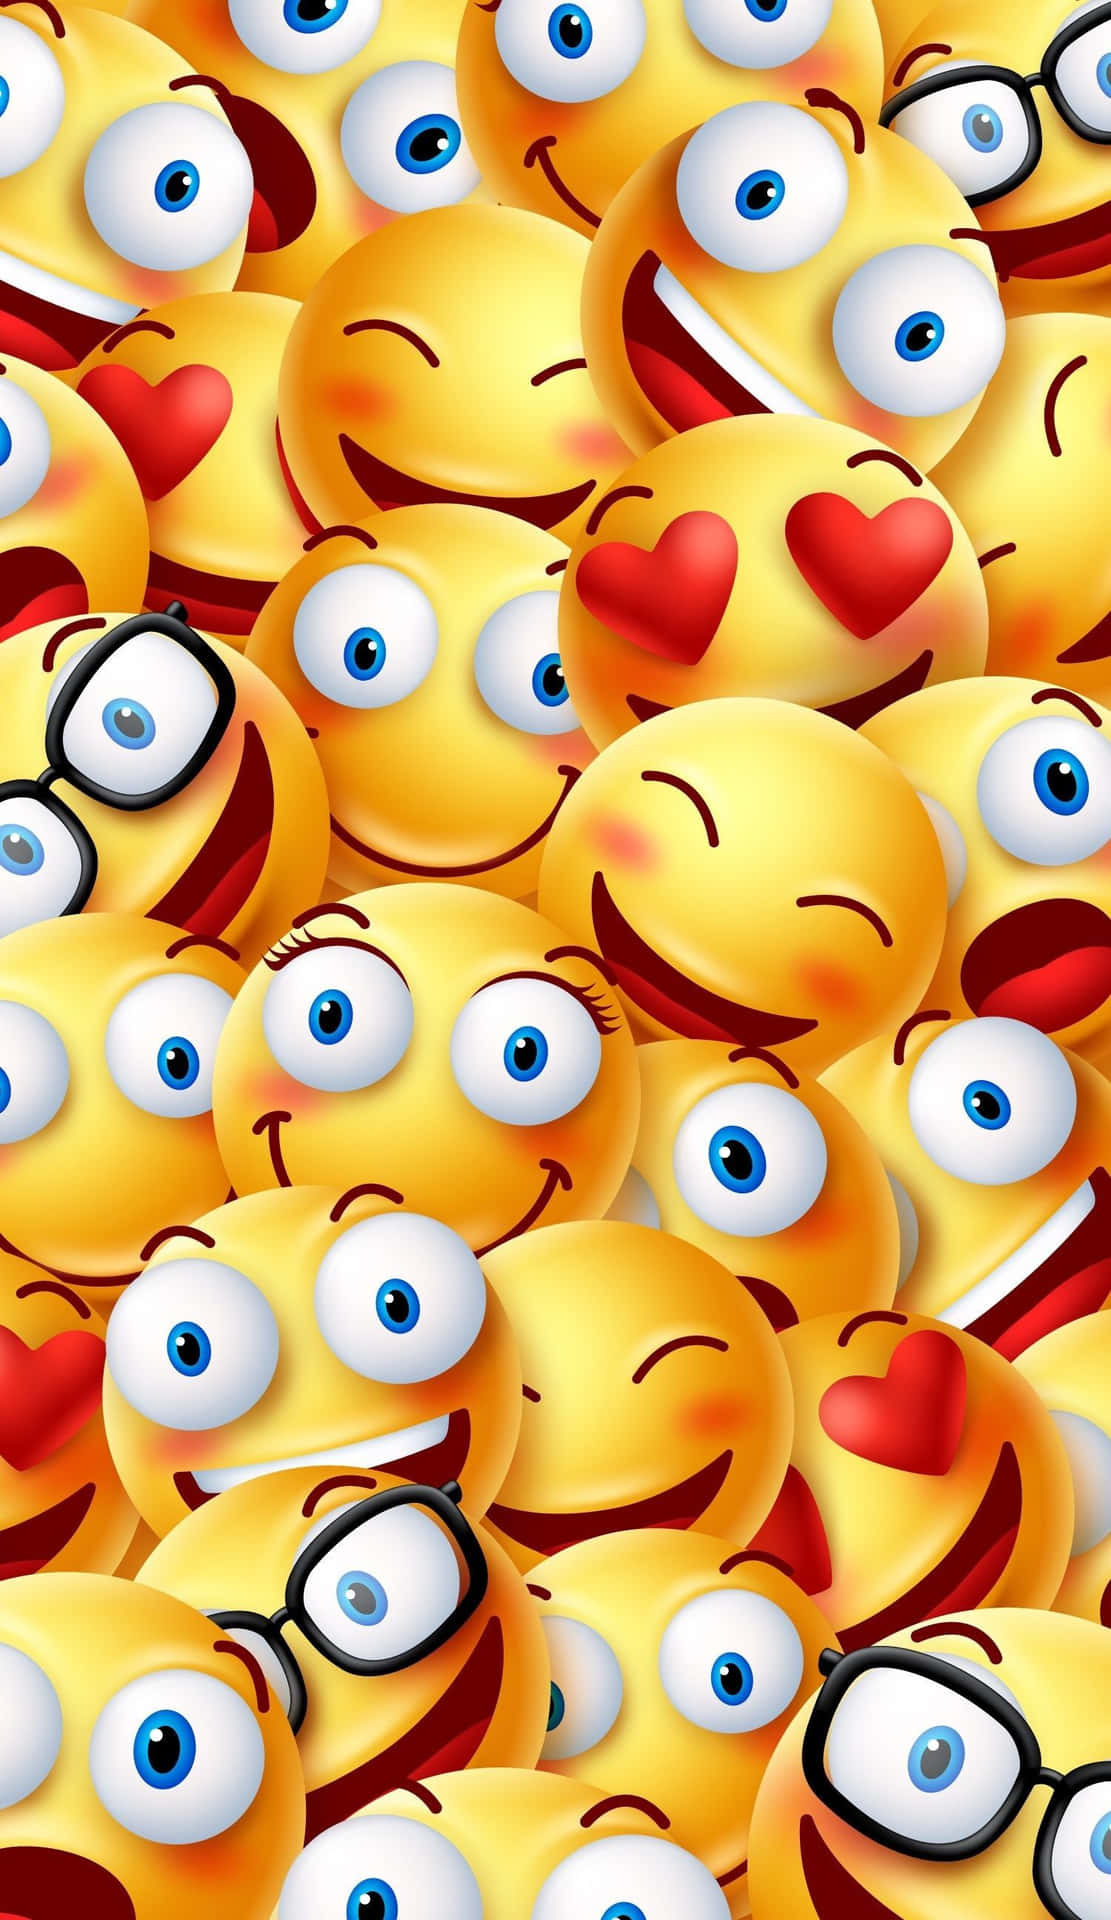 Express yourself with this adorable, cute emoji! Wallpaper